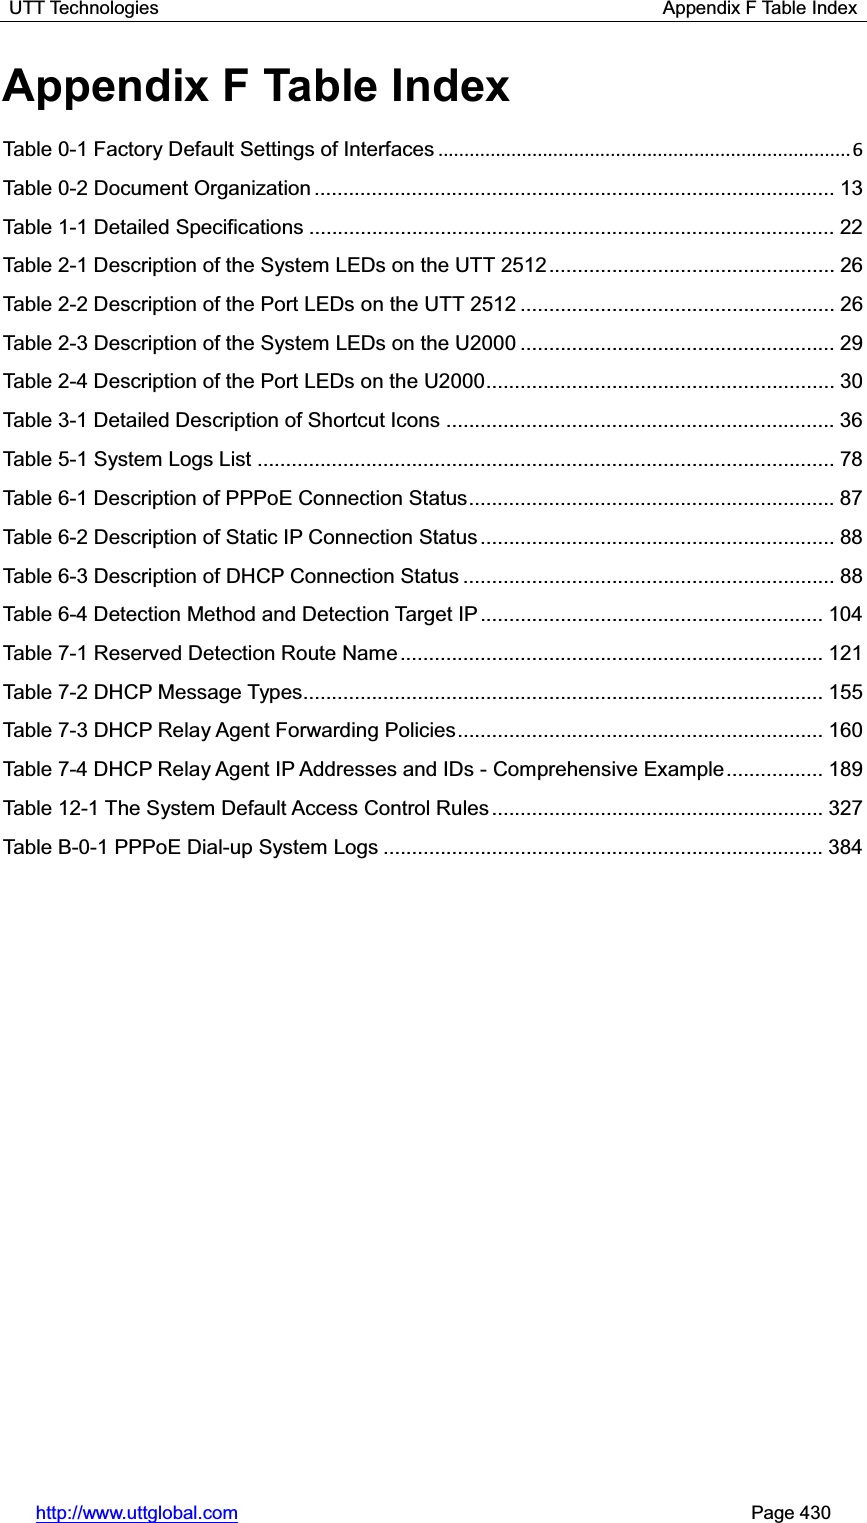 UTT Technologies                                                      Appendix F Table Index http://www.uttglobal.com                                                       Page 430 Appendix F Table Index Table 0-1 Factory Default Settings of Interfaces ............................................................................... 6 Table 0-2 Document Organization ........................................................................................... 13Table 1-1 Detailed Specifications ............................................................................................ 22Table 2-1 Description of the System LEDs on the UTT 2512 .................................................. 26Table 2-2 Description of the Port LEDs on the UTT 2512 ....................................................... 26Table 2-3 Description of the System LEDs on the U2000 ....................................................... 29Table 2-4 Description of the Port LEDs on the U2000............................................................. 30Table 3-1 Detailed Description of Shortcut Icons .................................................................... 36Table 5-1 System Logs List ..................................................................................................... 78Table 6-1 Description of PPPoE Connection Status ................................................................ 87Table 6-2 Description of Static IP Connection Status .............................................................. 88Table 6-3 Description of DHCP Connection Status ................................................................. 88Table 6-4 Detection Method and Detection Target IP ............................................................ 104Table 7-1 Reserved Detection Route Name .......................................................................... 121Table 7-2 DHCP Message Types........................................................................................... 155Table 7-3 DHCP Relay Agent Forwarding Policies ................................................................ 160Table 7-4 DHCP Relay Agent IP Addresses and IDs - Comprehensive Example ................. 189Table 12-1 The System Default Access Control Rules .......................................................... 327Table B-0-1 PPPoE Dial-up System Logs ............................................................................. 384